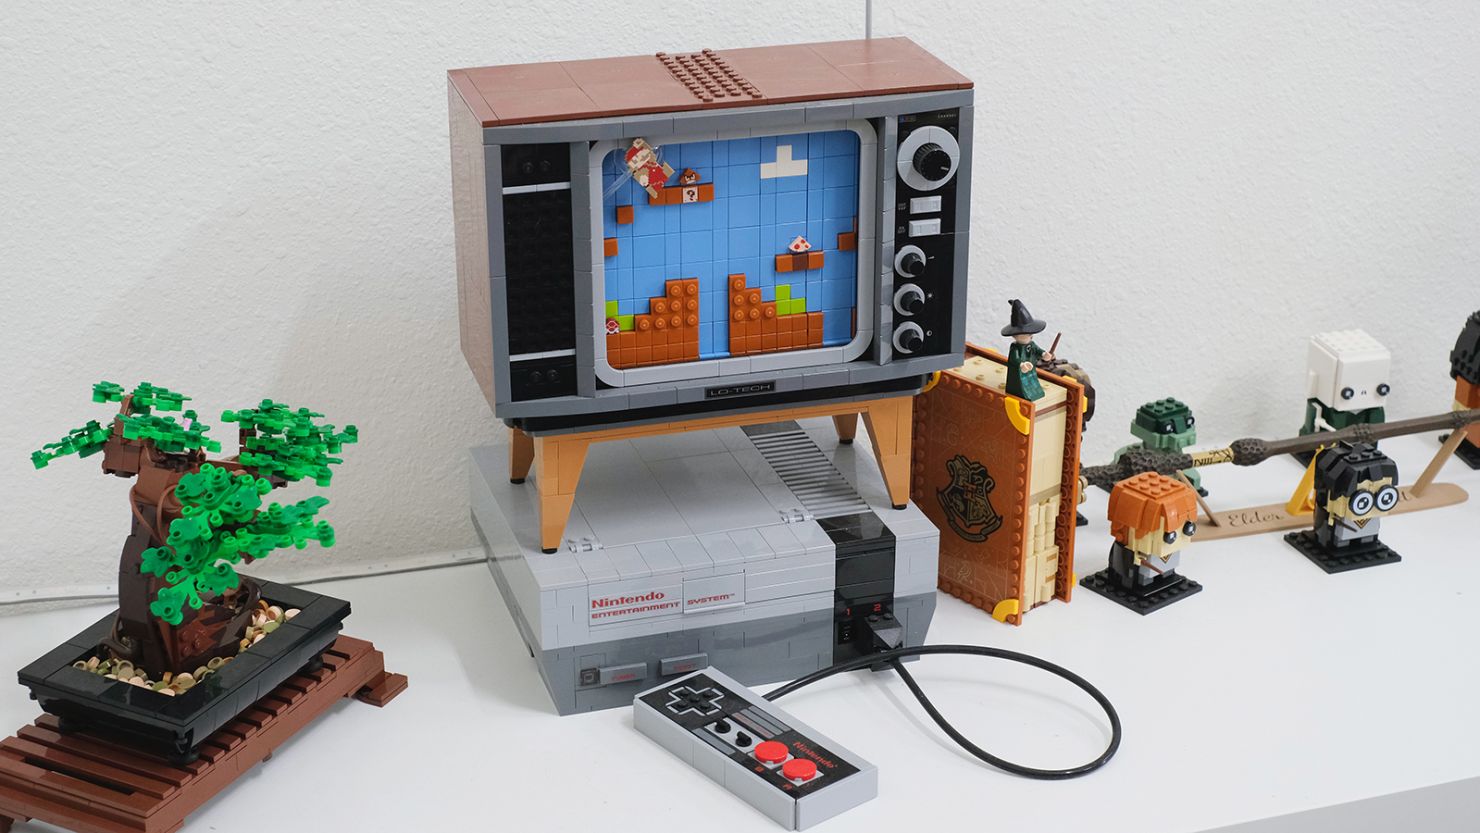 Lego's buildable NES console comes with a 'playable' game